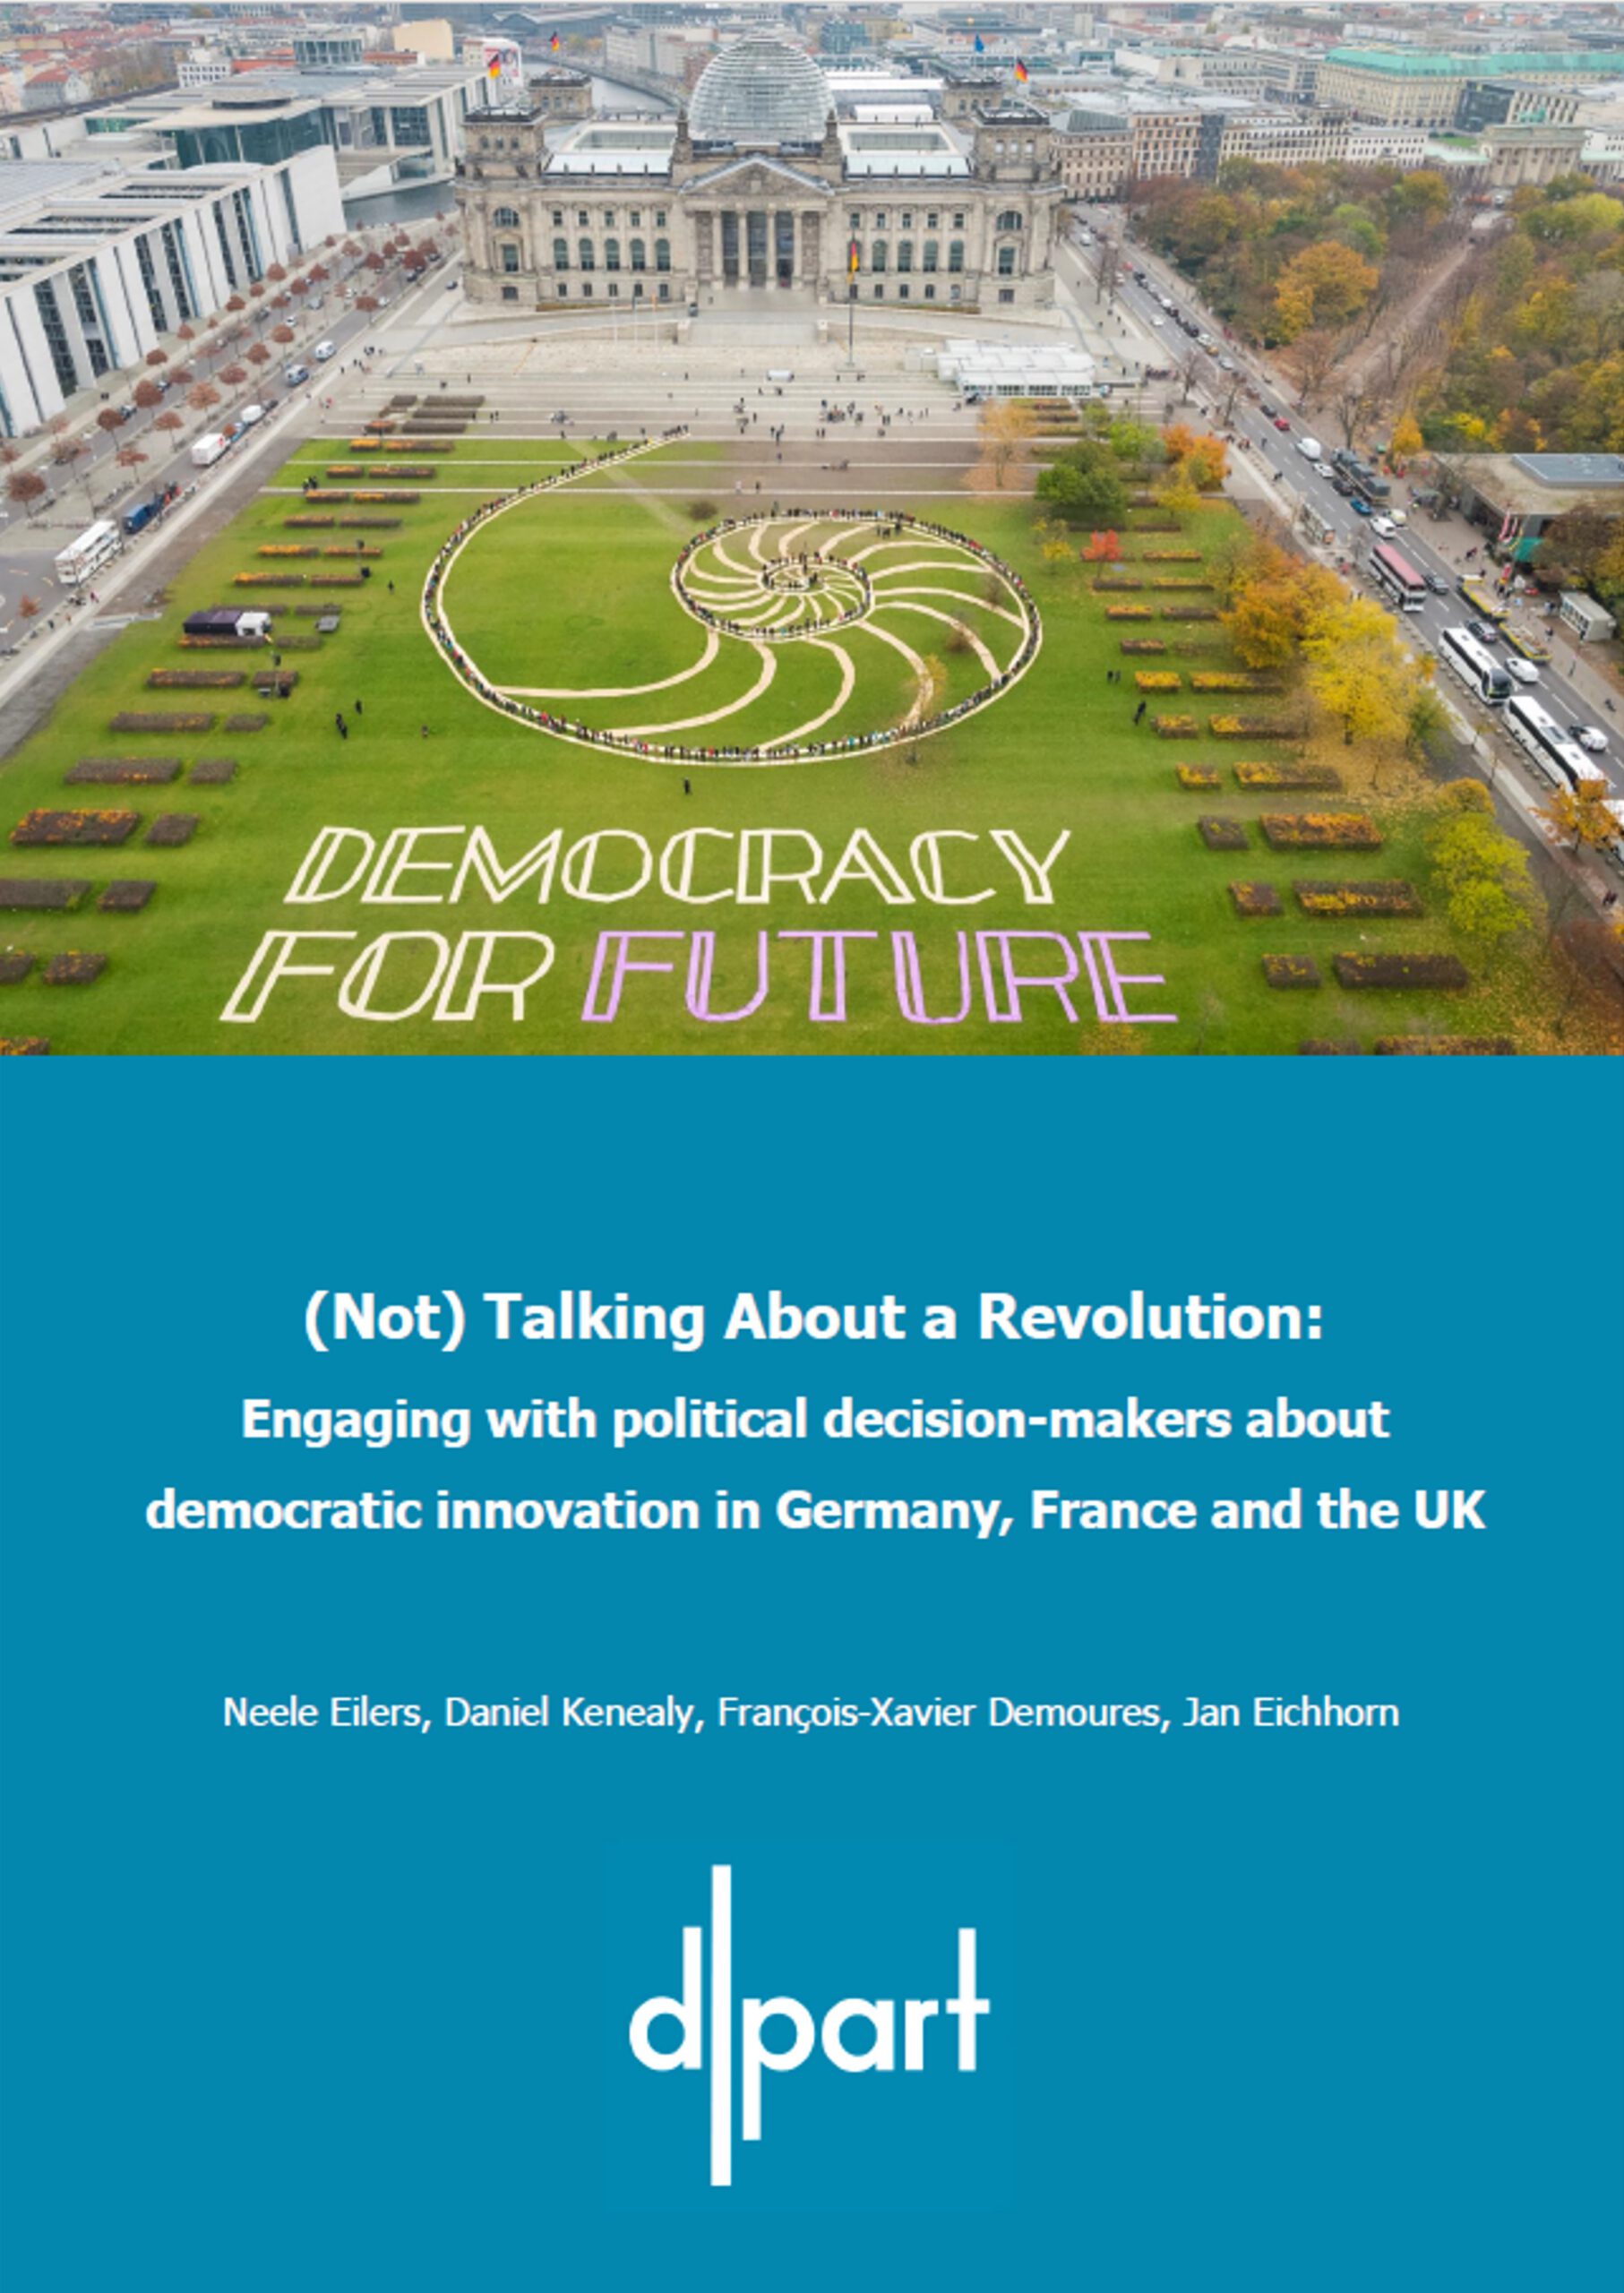 Title picture of a report on democratic innovation in Germany, France, and the UK published by dpart